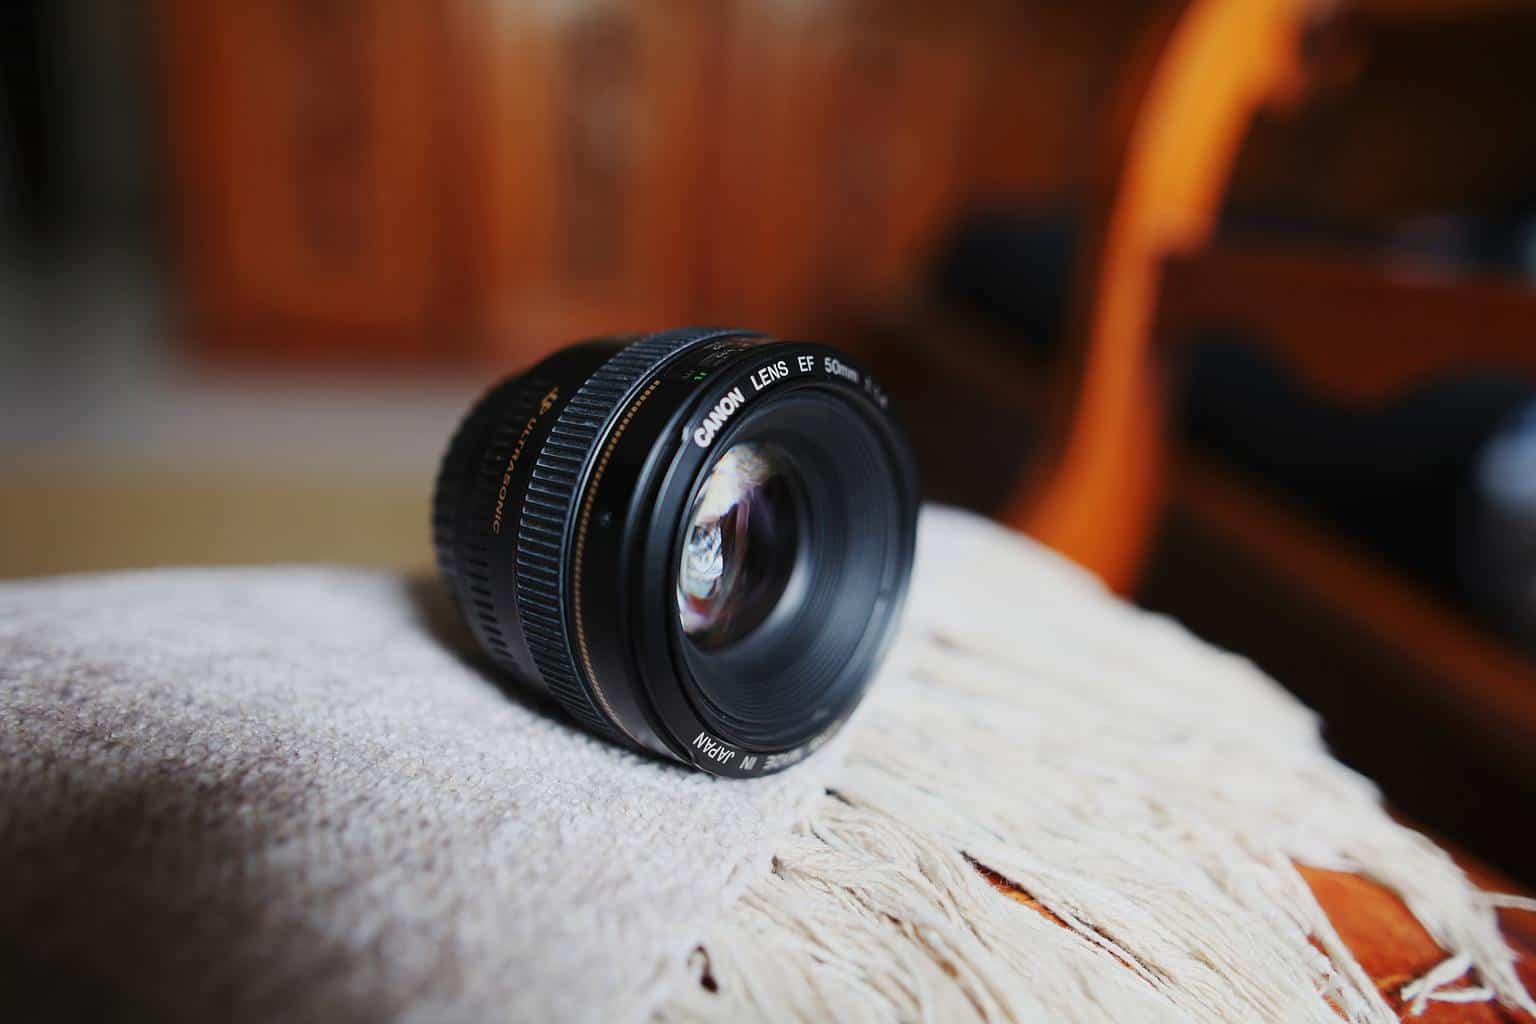 Canon 50mm lens placed on a blanket